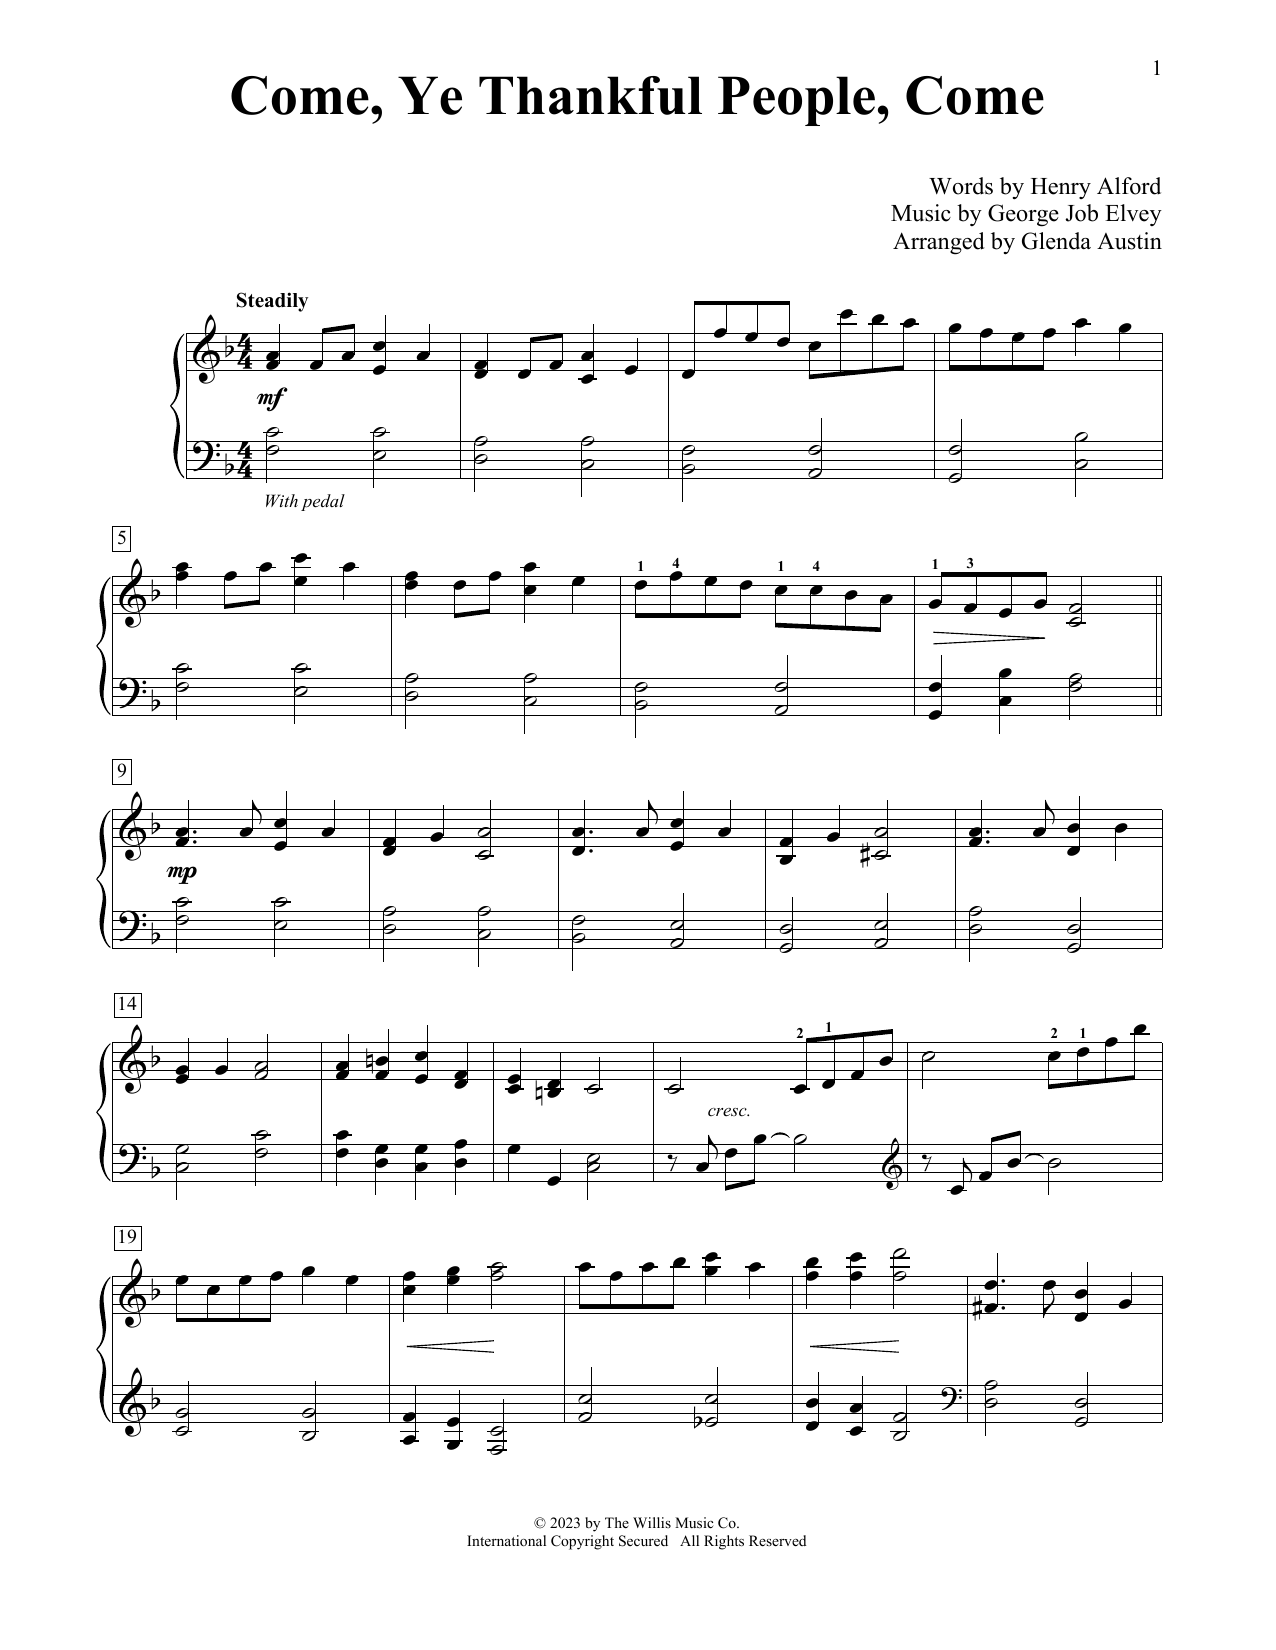 Download Henry Alford and George Job Elvey Come, Ye Thankful People, Come (arr. Gl Sheet Music